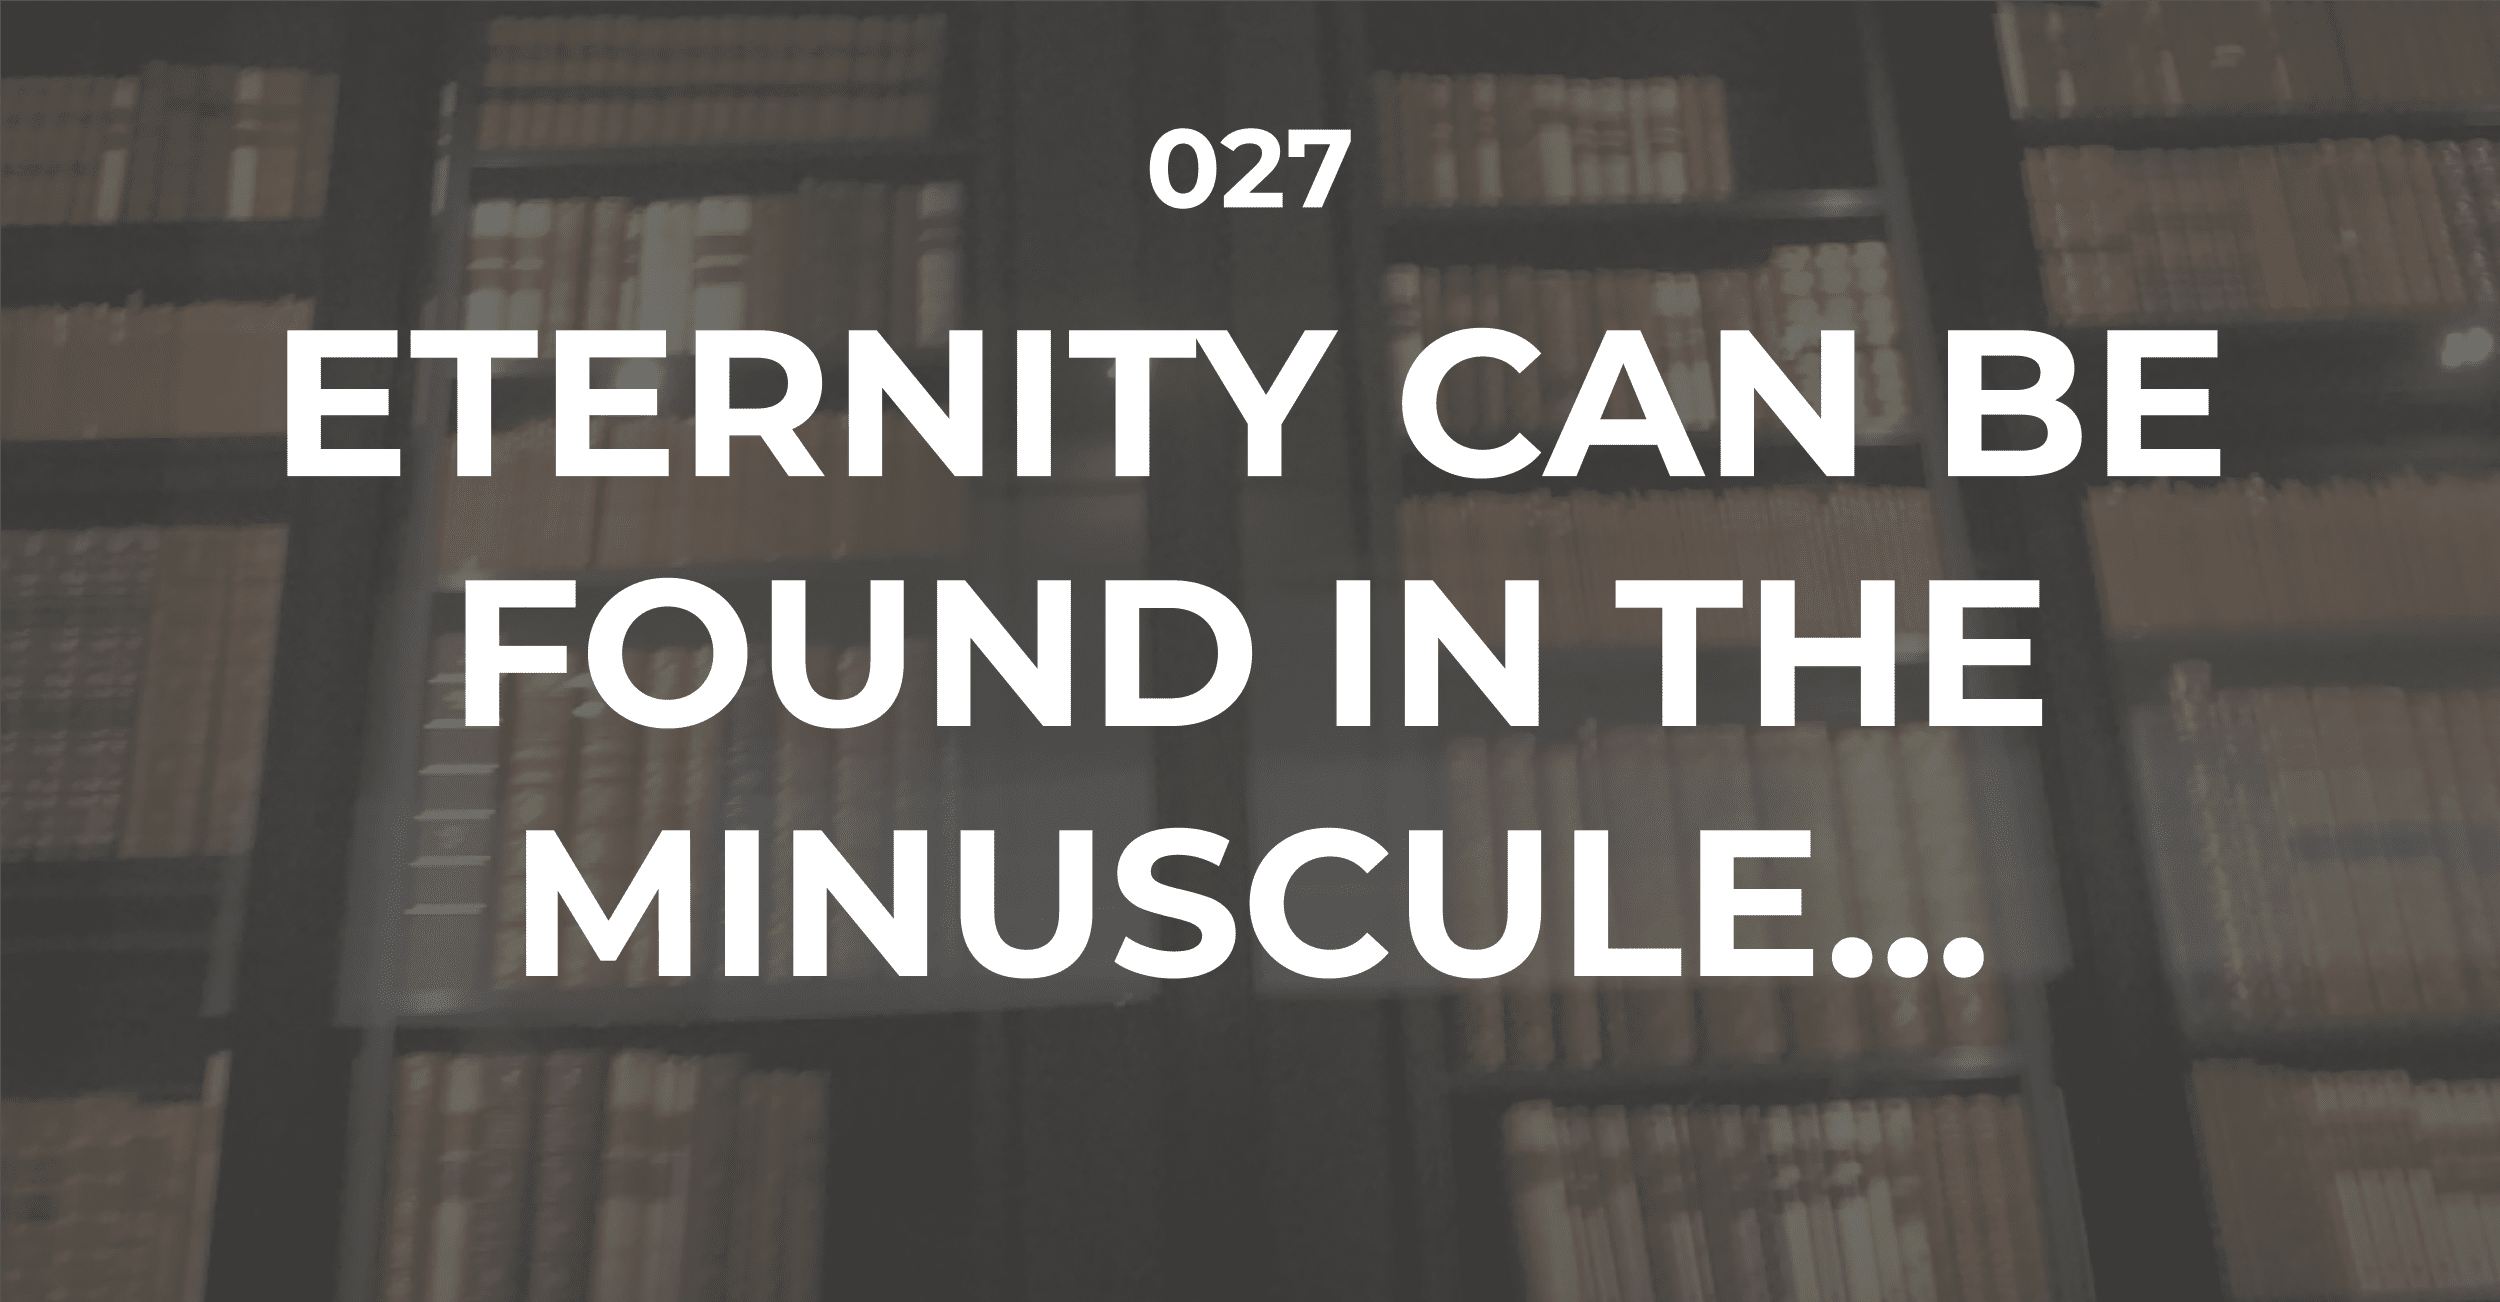 Eternity can be found in the minuscule…